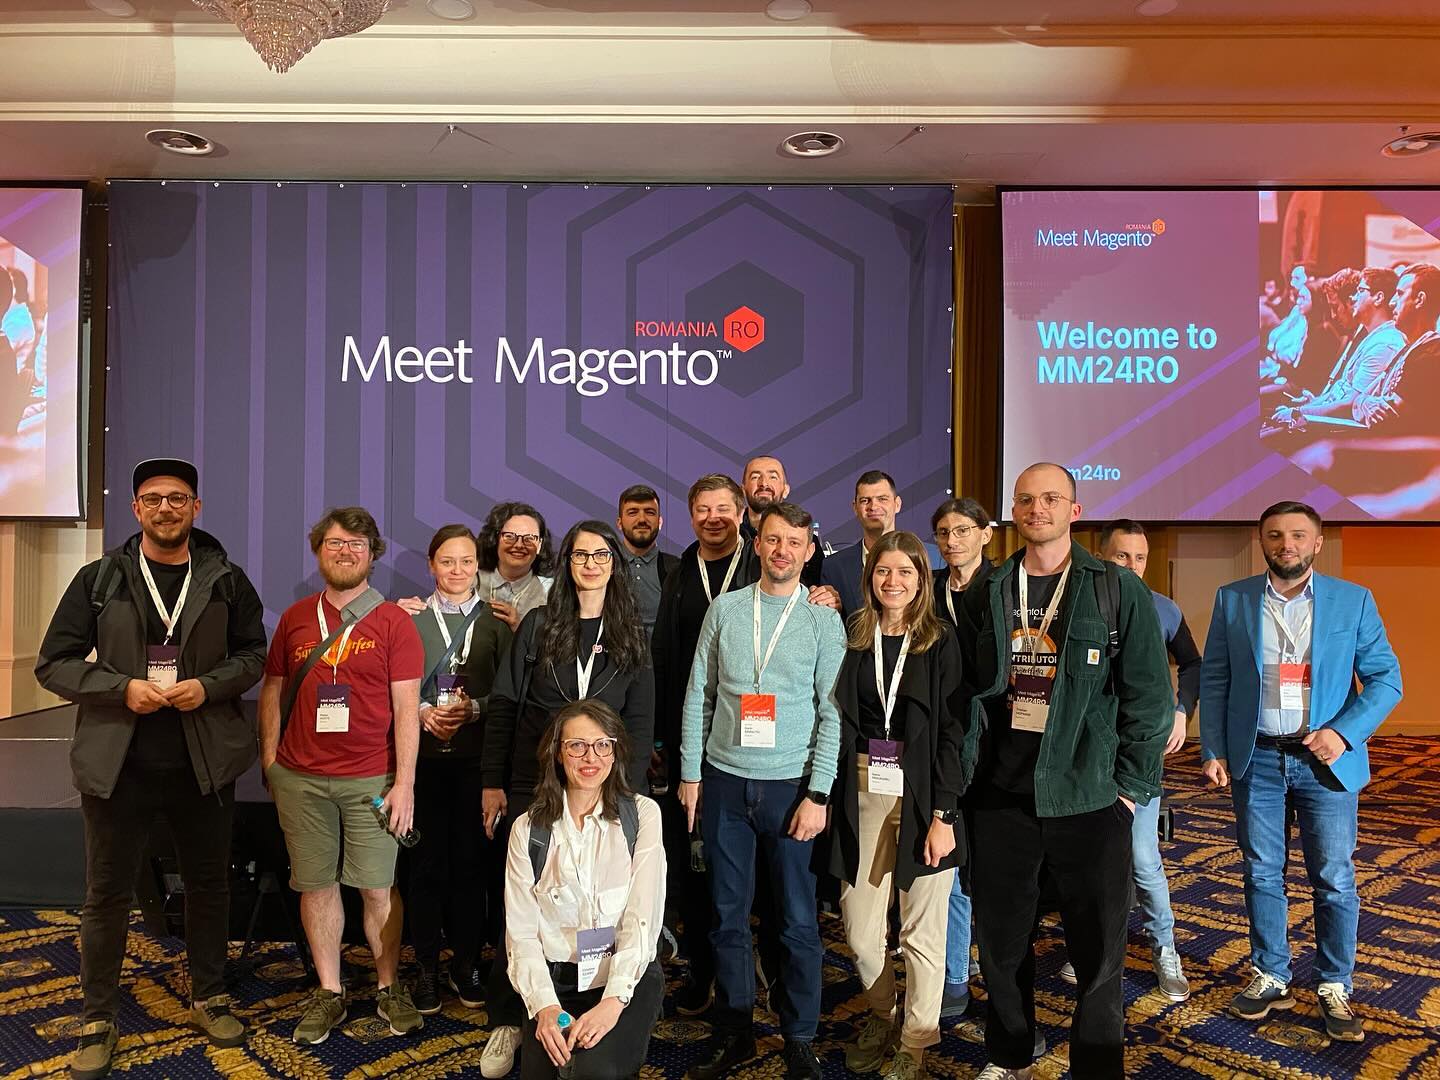 #mm24ro
Baldwin team had a good time connecting, learning &amp; growing alongside the vibrant #MagentoCommunity.